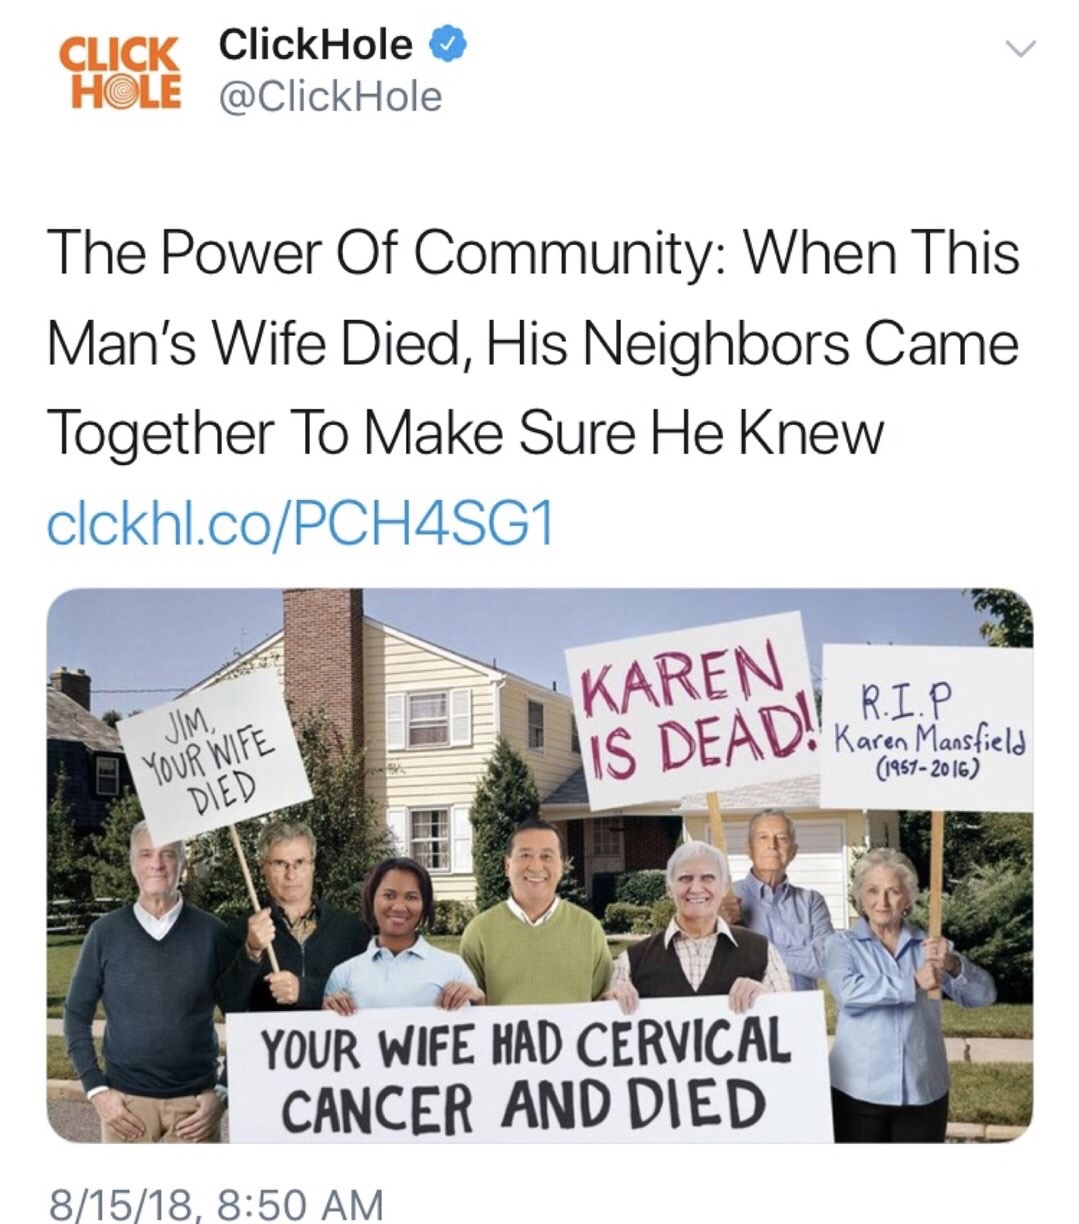 memes - presentation - Click ClickHole Hole The Power Of Community When This Man's Wife Died, His Neighbors Came Together To Make Sure He Knew clckhl.coPCH4SG1 Karen, Jim Vi R.I.P W Karen Mansfield 19572016 Your Wife Died Your Wife Had Cervical Cancer And